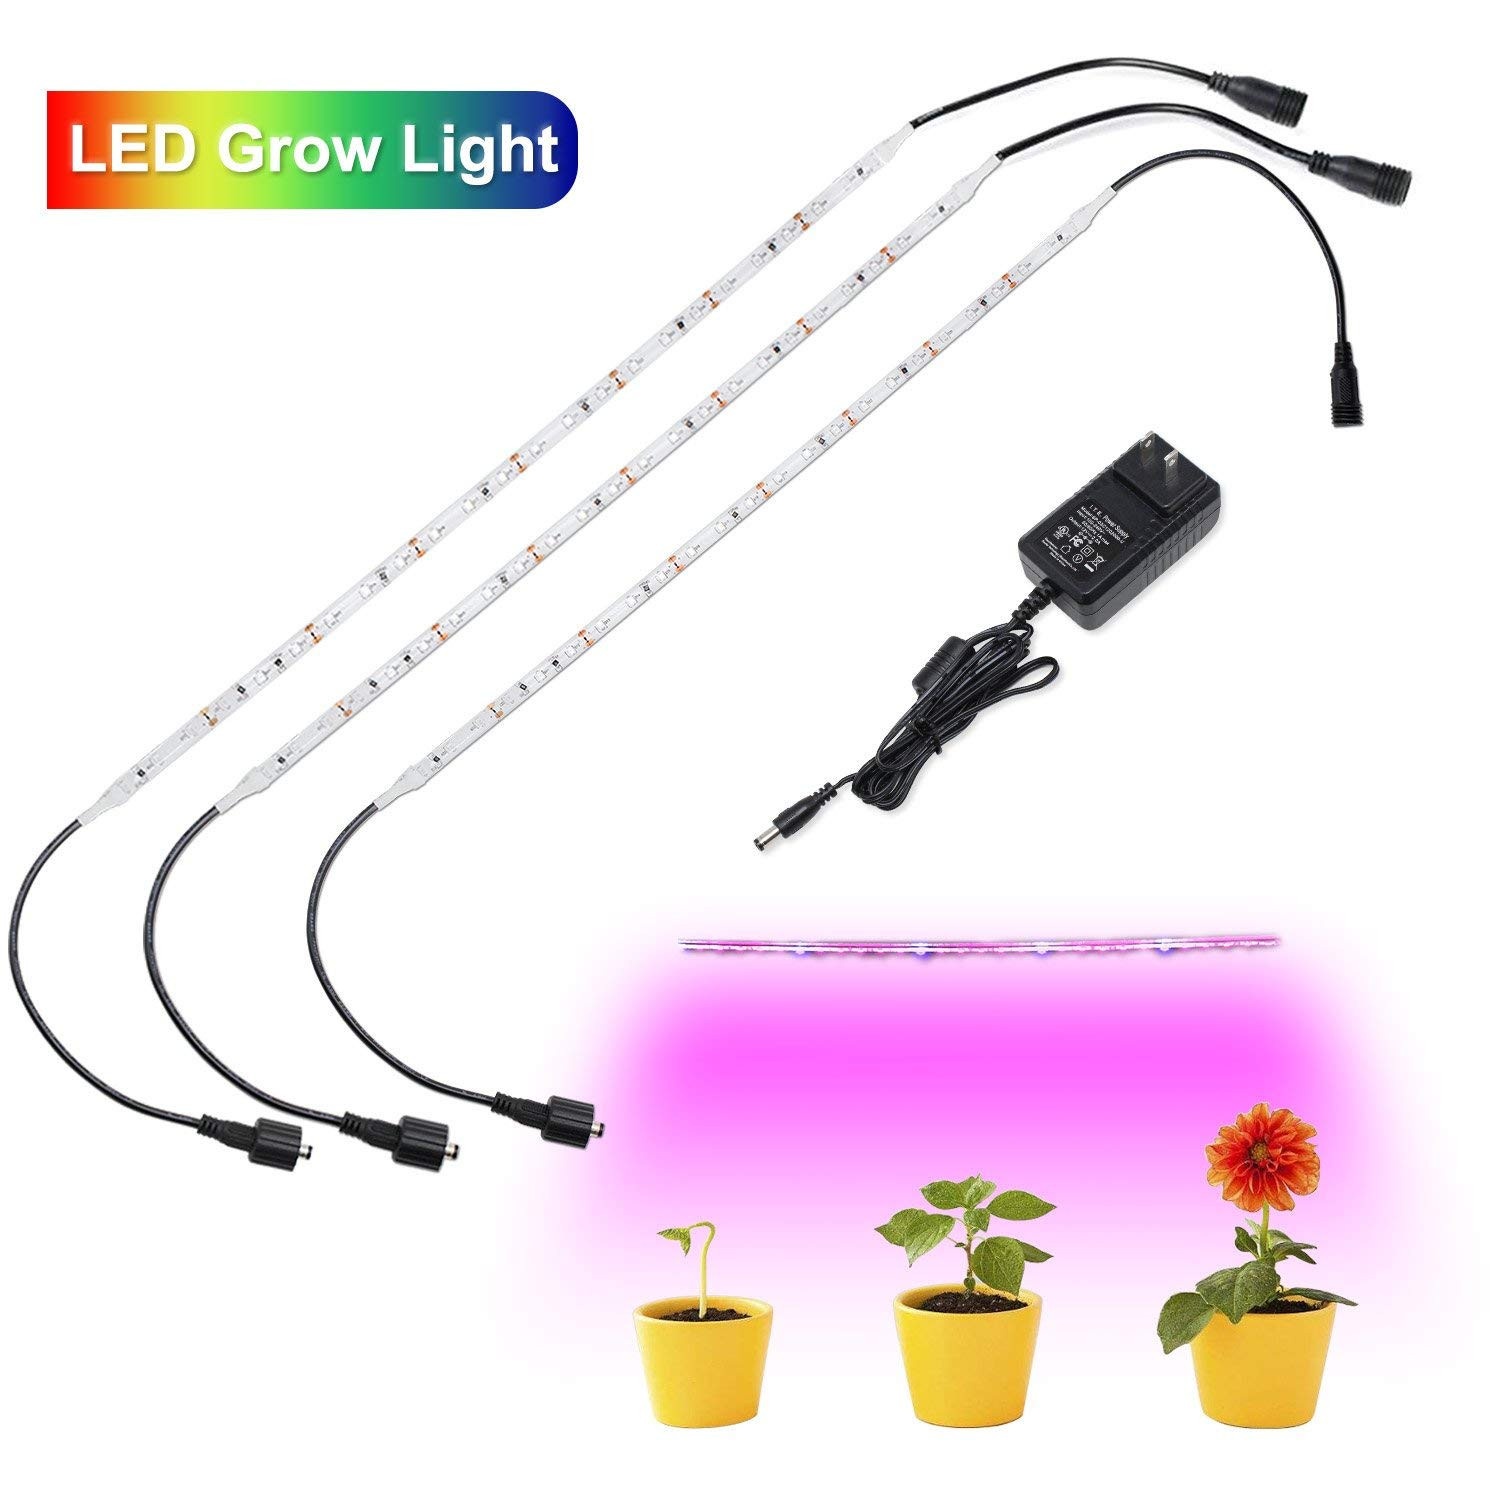 LED Grow Light Plant Growing Lamp LED Strip Lights For Indoor Plants Hydroponics 